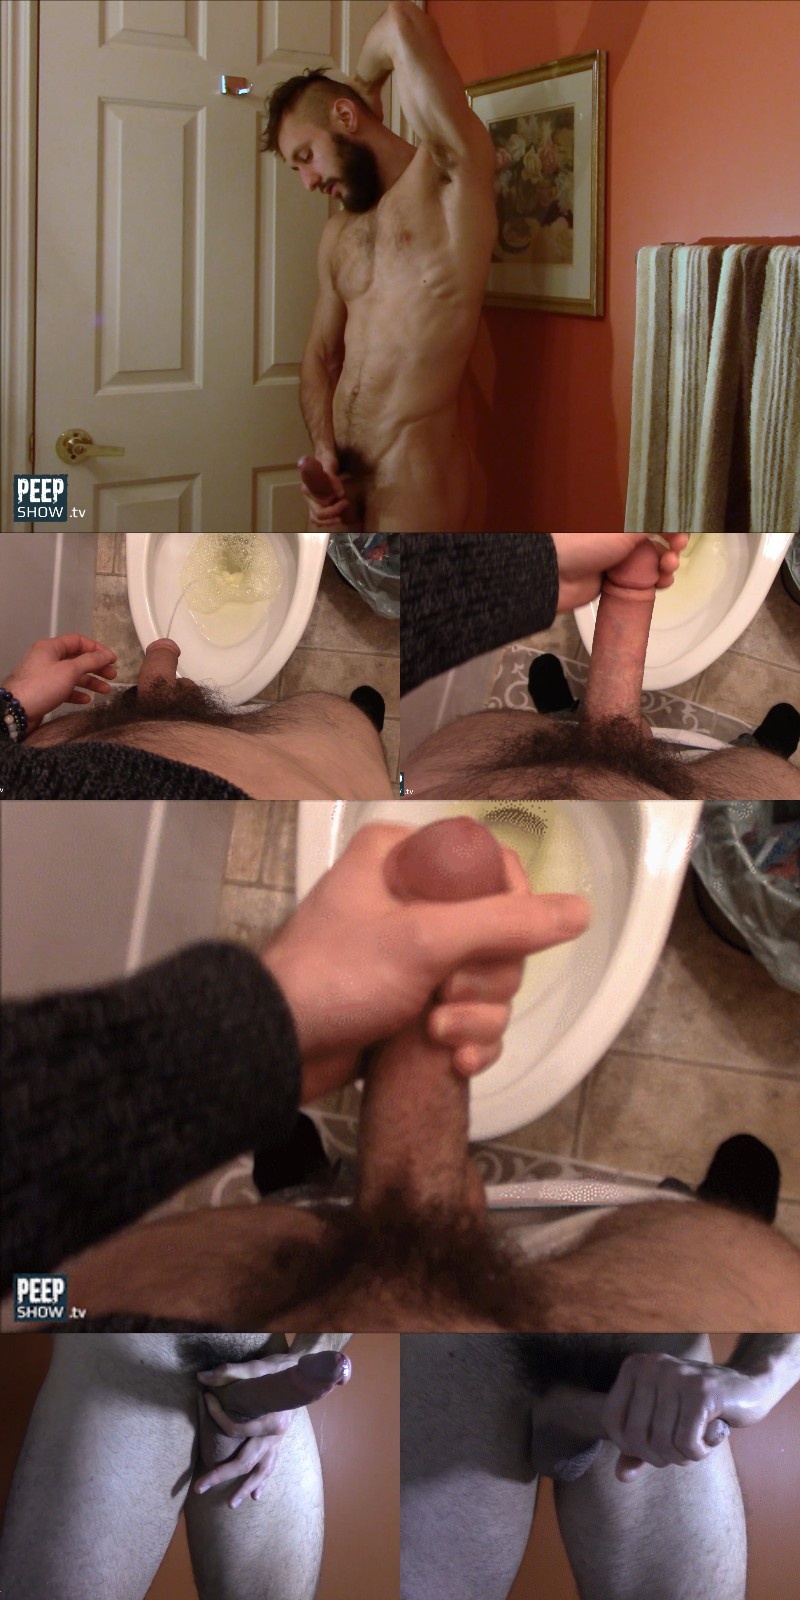 Bearded Stud Pisses & Cums in Homemade Video